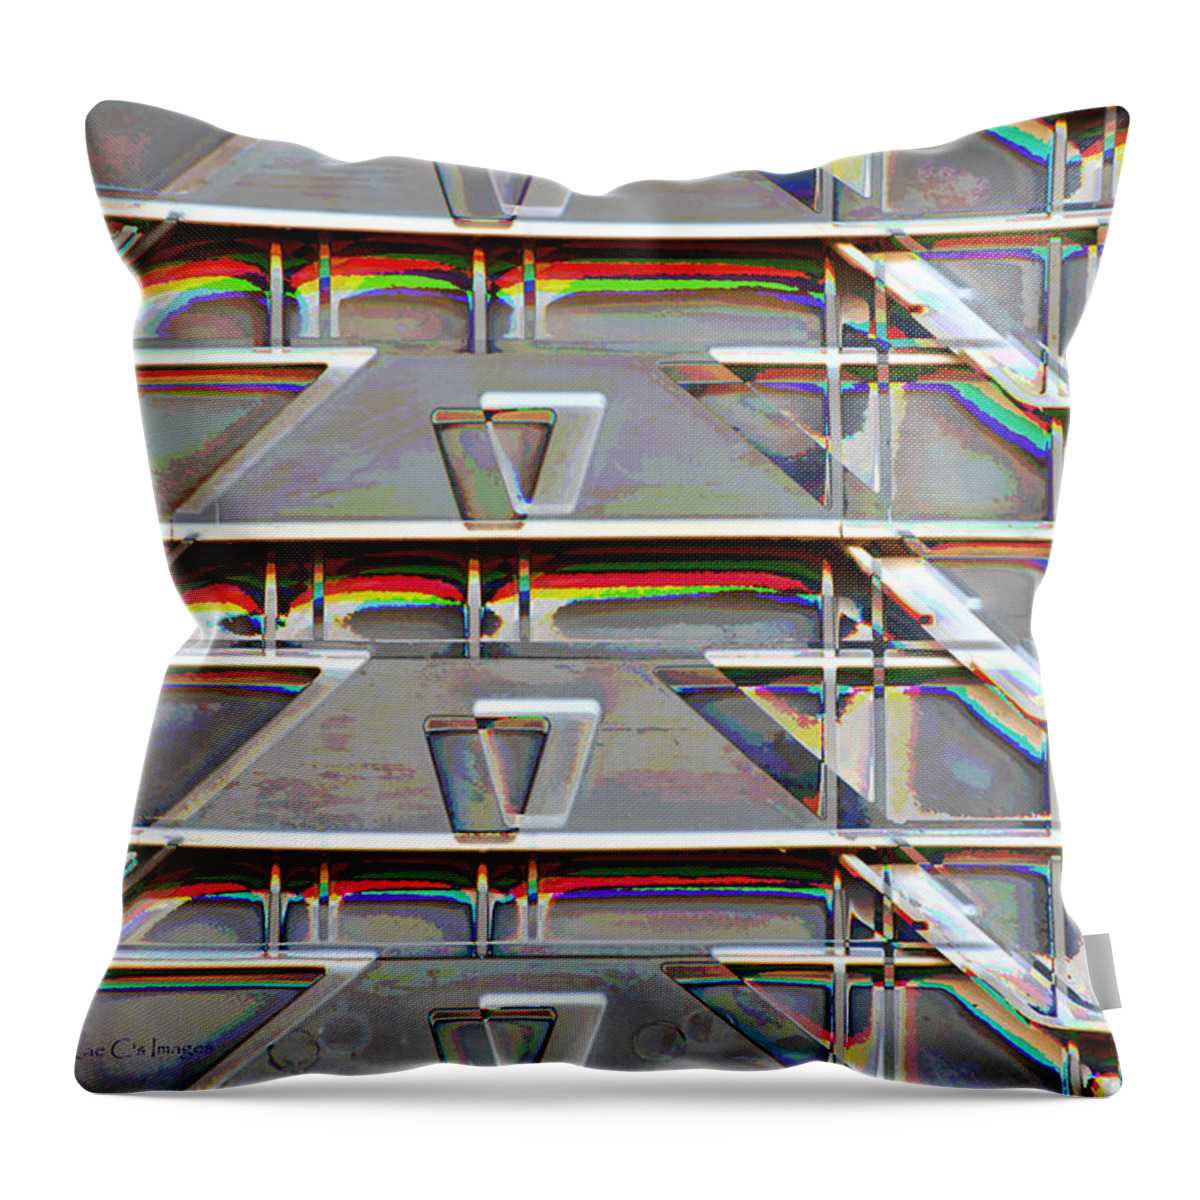 Crates Throw Pillow featuring the digital art Stacked Storage Crates Abstract by Kae Cheatham